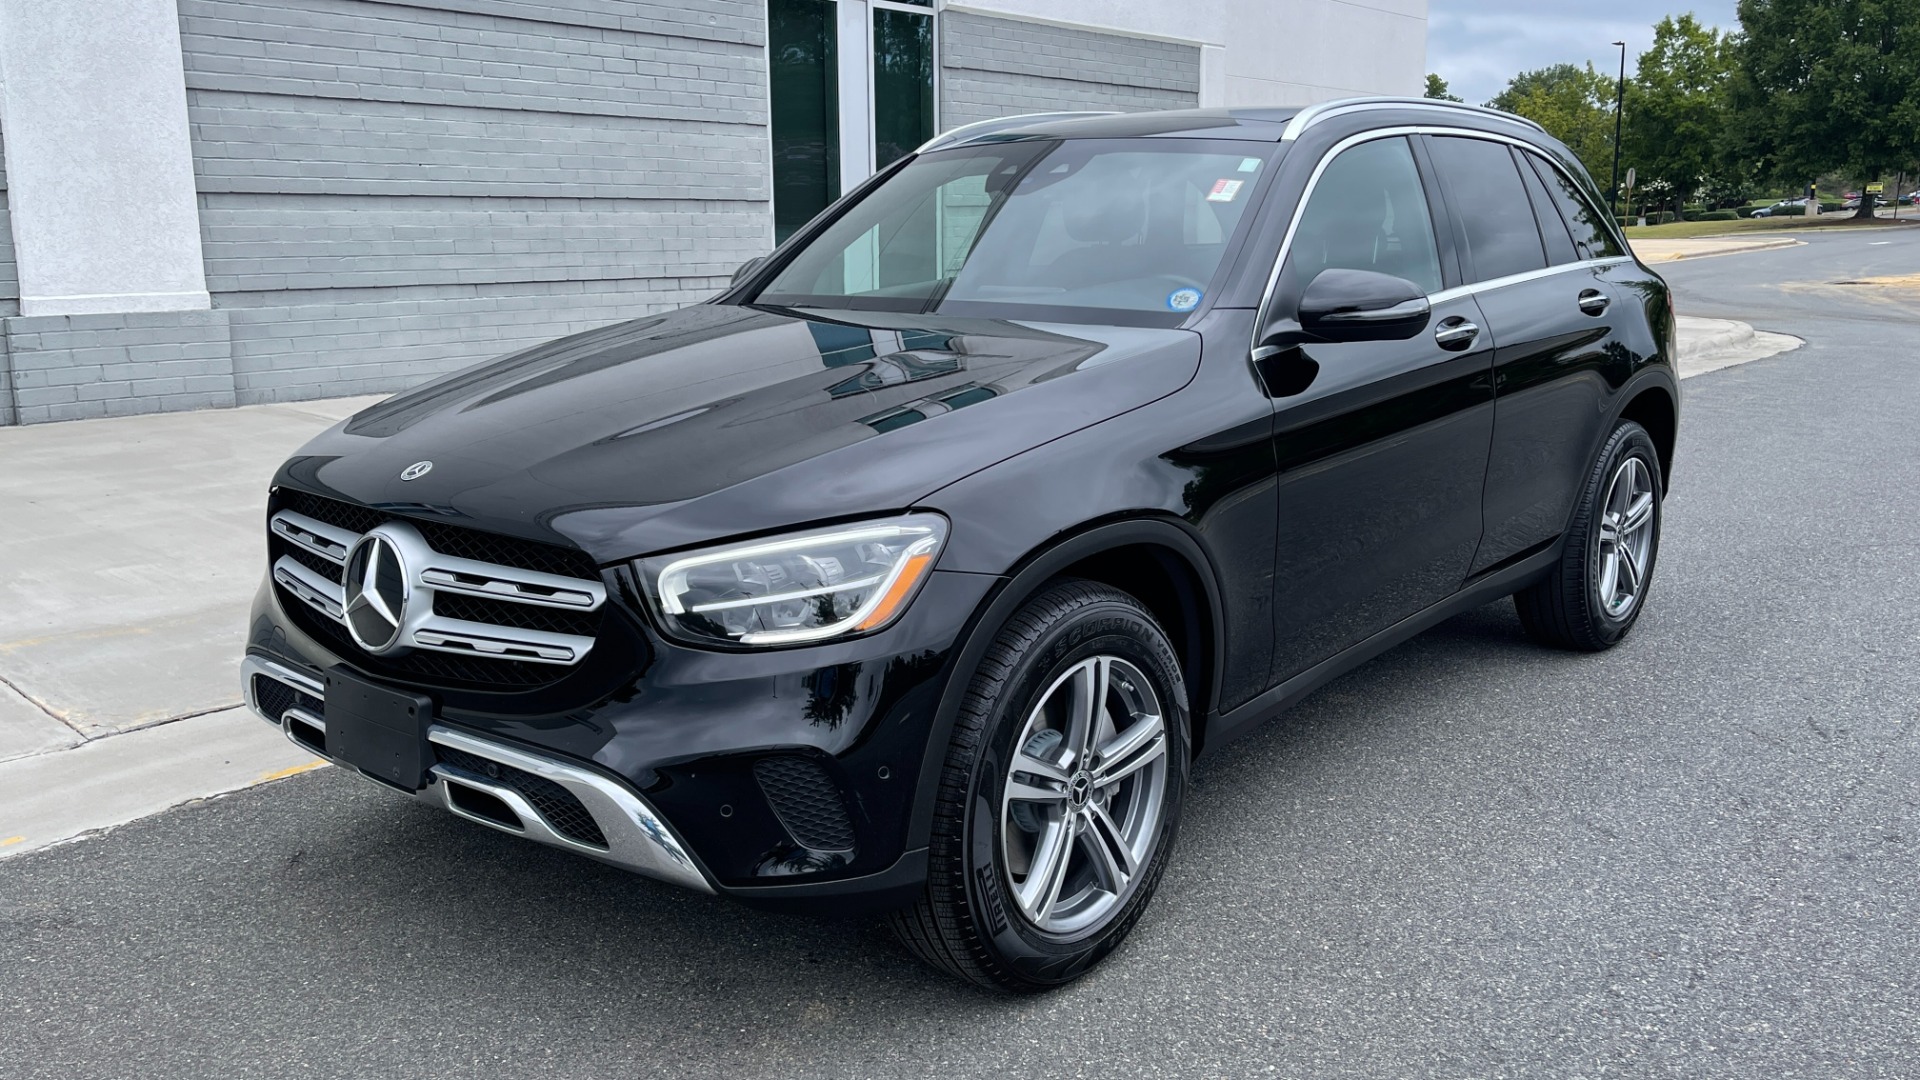 Used 2021 Mercedes-Benz GLC GLC 300 / 4MATIC / DASHCAM / PANORAMIC ROOF / WIRELESS CHARING / PREMIUM for sale $44,995 at Formula Imports in Charlotte NC 28227 5